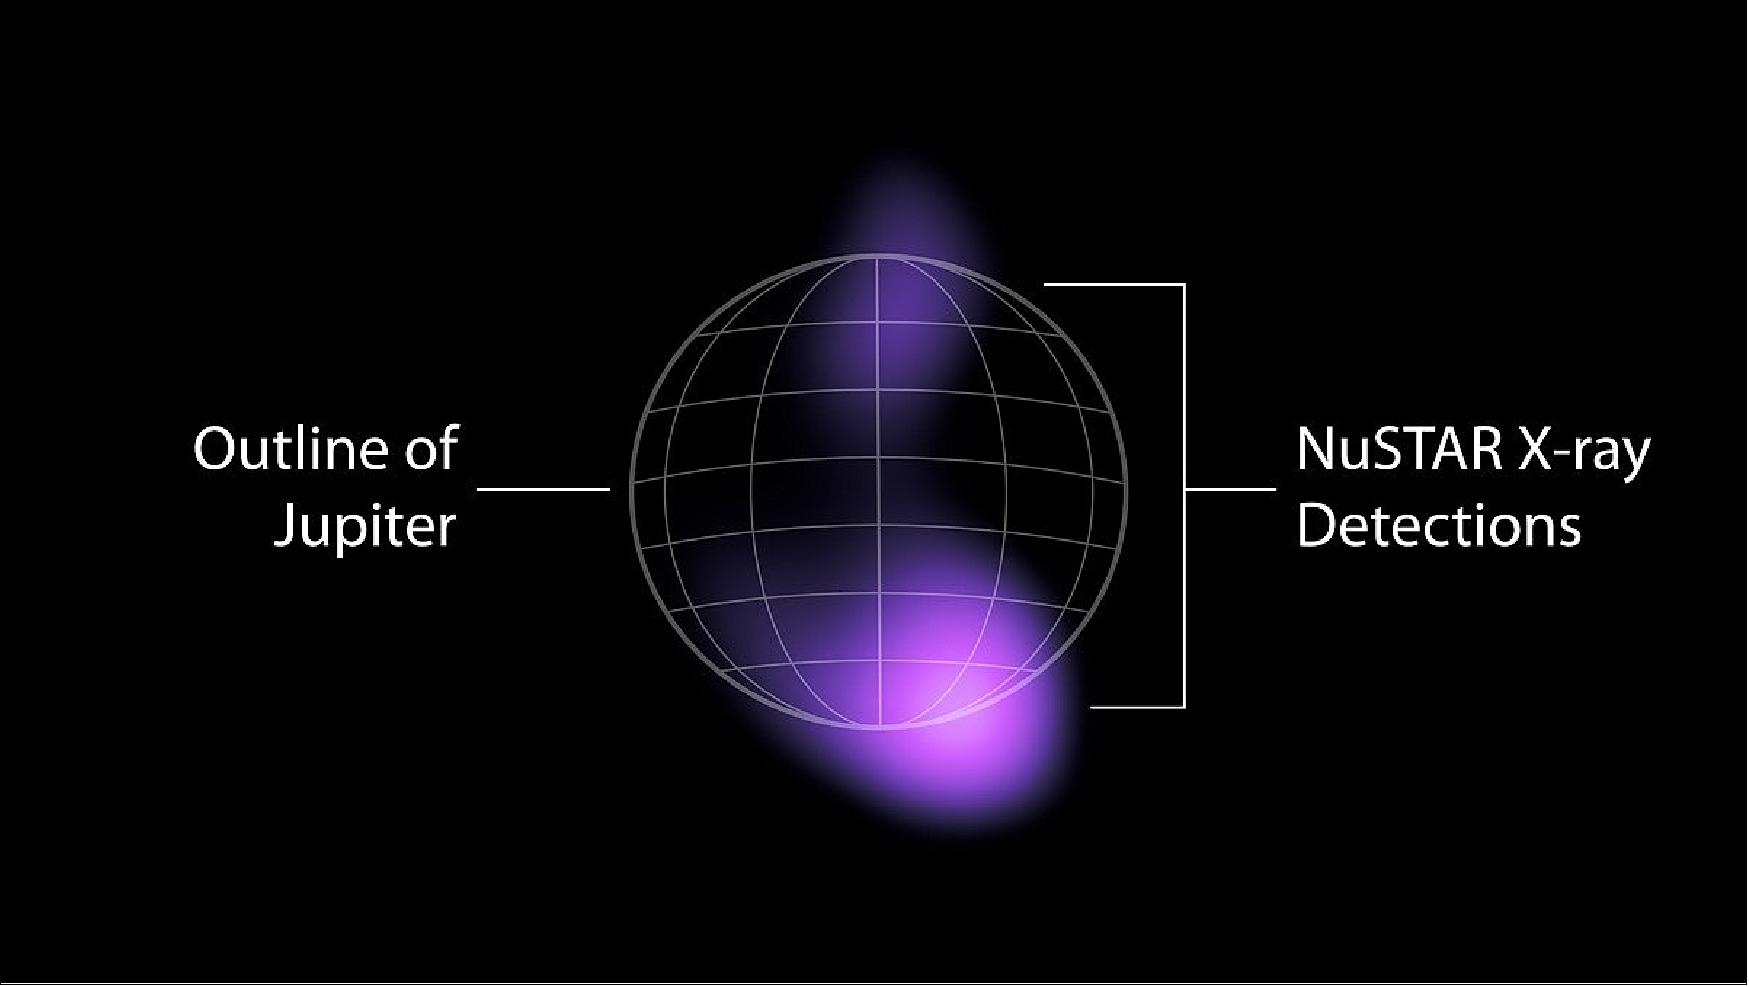 Figure 16: NuSTAR detected high-energy X-rays from the auroras near Jupiter's north and south poles. NuSTAR cannot locate the source of the light with high precision, but can only find that the light is coming from somewhere in the purple-colored regions (image credit: NASA/JPL-Caltech)